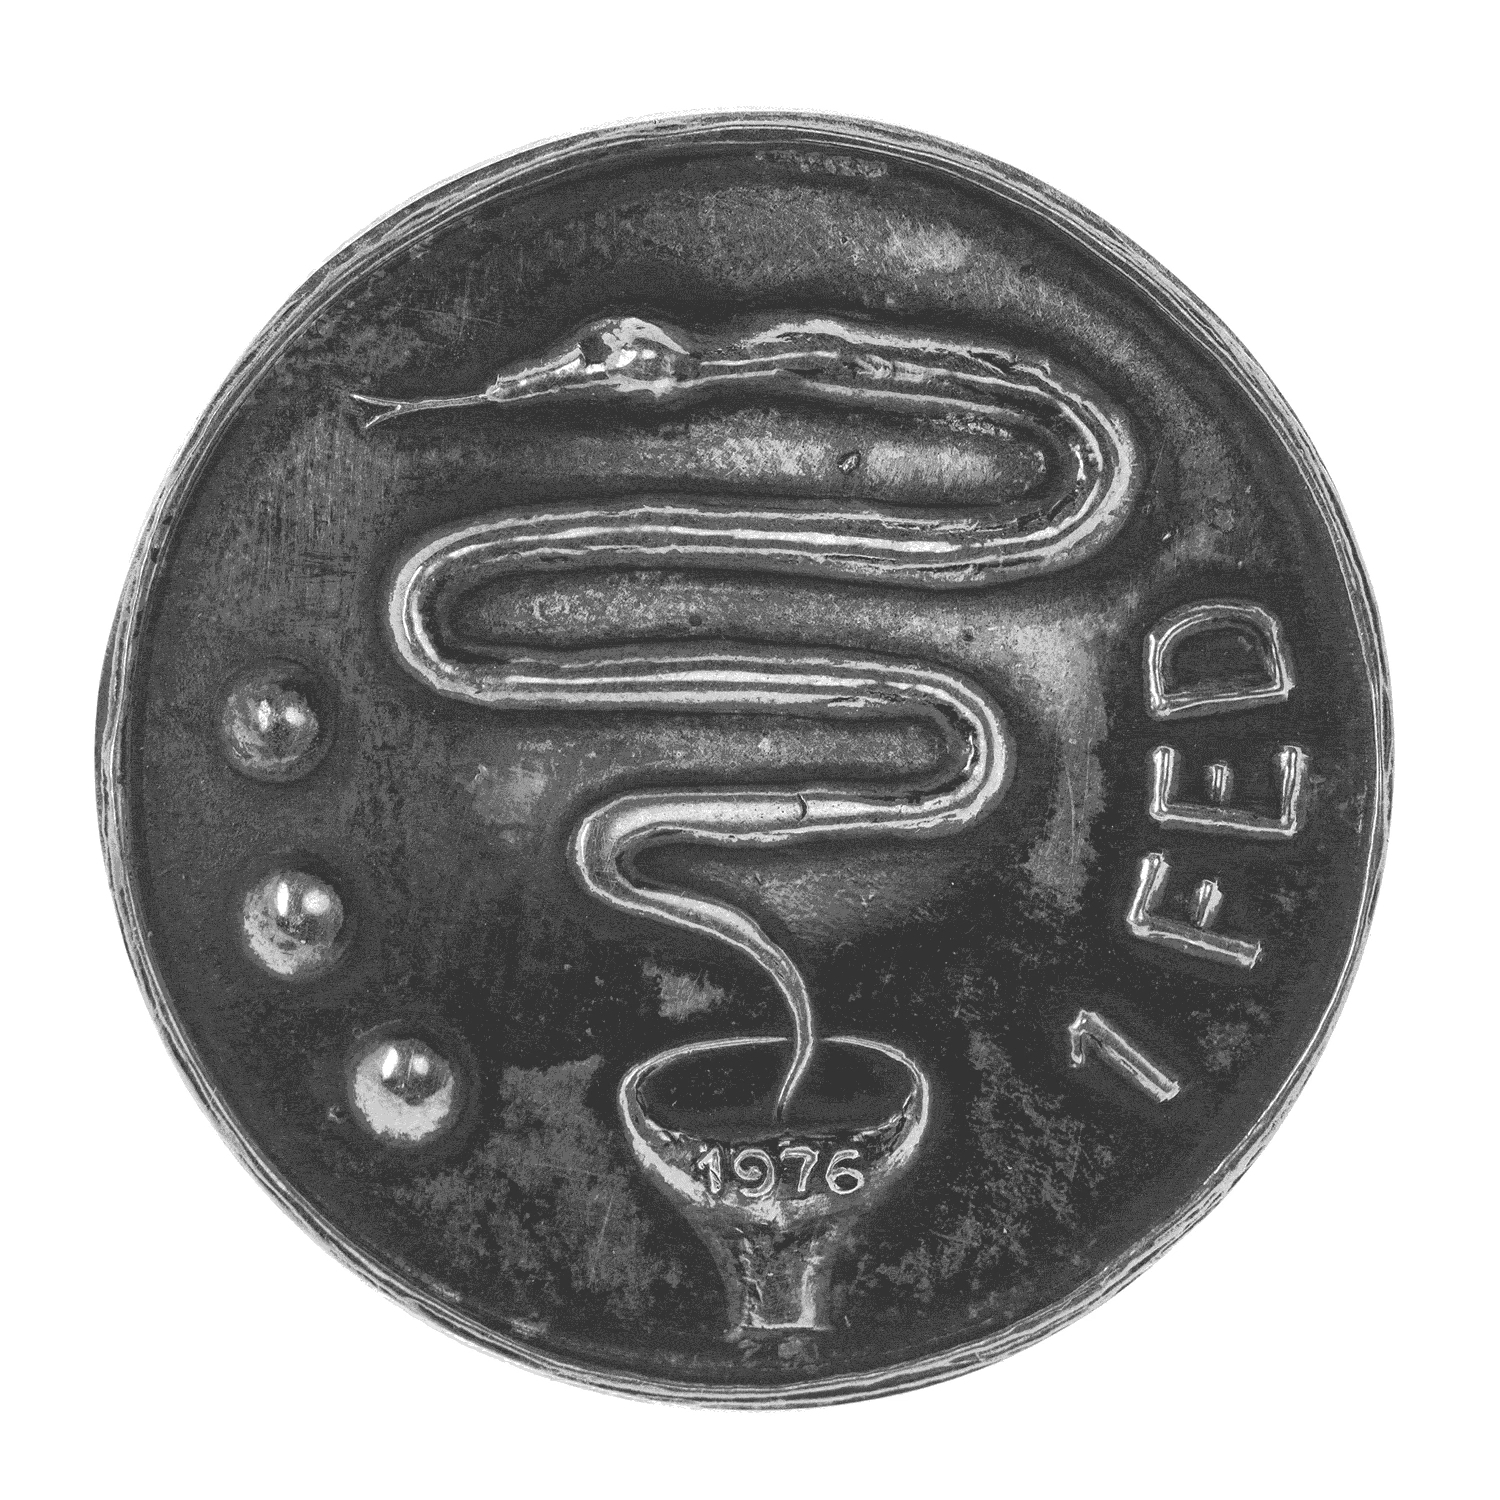 A silver coin with darkened oxidation in areas. At the bottom of the coin is the top of a chillum, up from which rises a plume of smoke in the form of a snake. On the chillum’s edge is the year: “1976.” Left of the snake, three dots (Christiania’s symbol) are seen; and to the right, the inscription: “1 FED.”